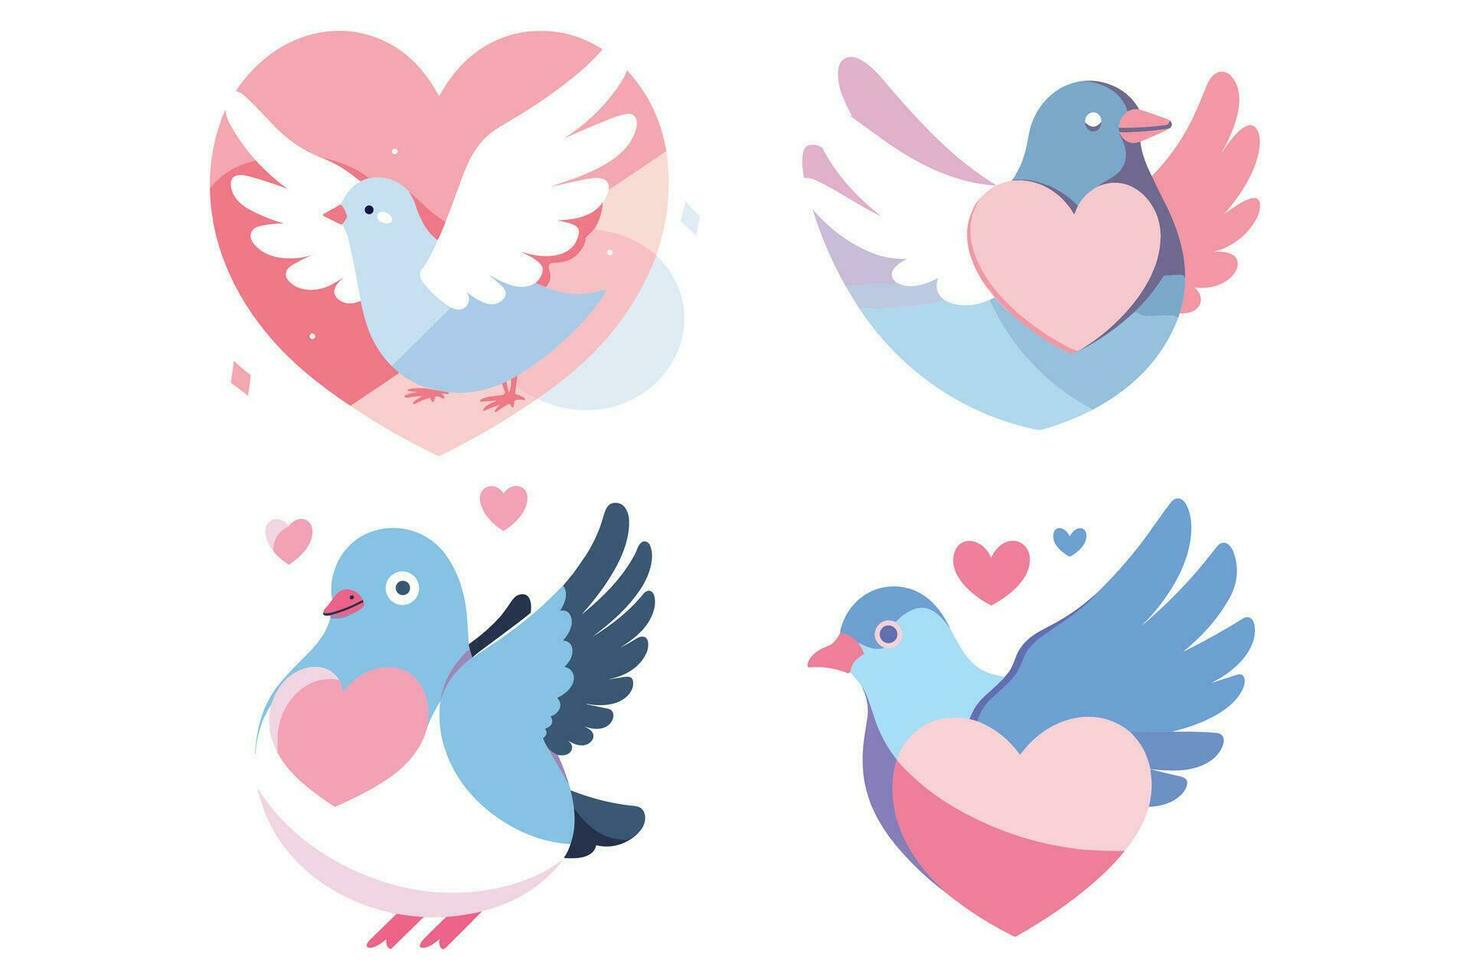 white dove with heart in the wedding concept in UX UI flat style vector